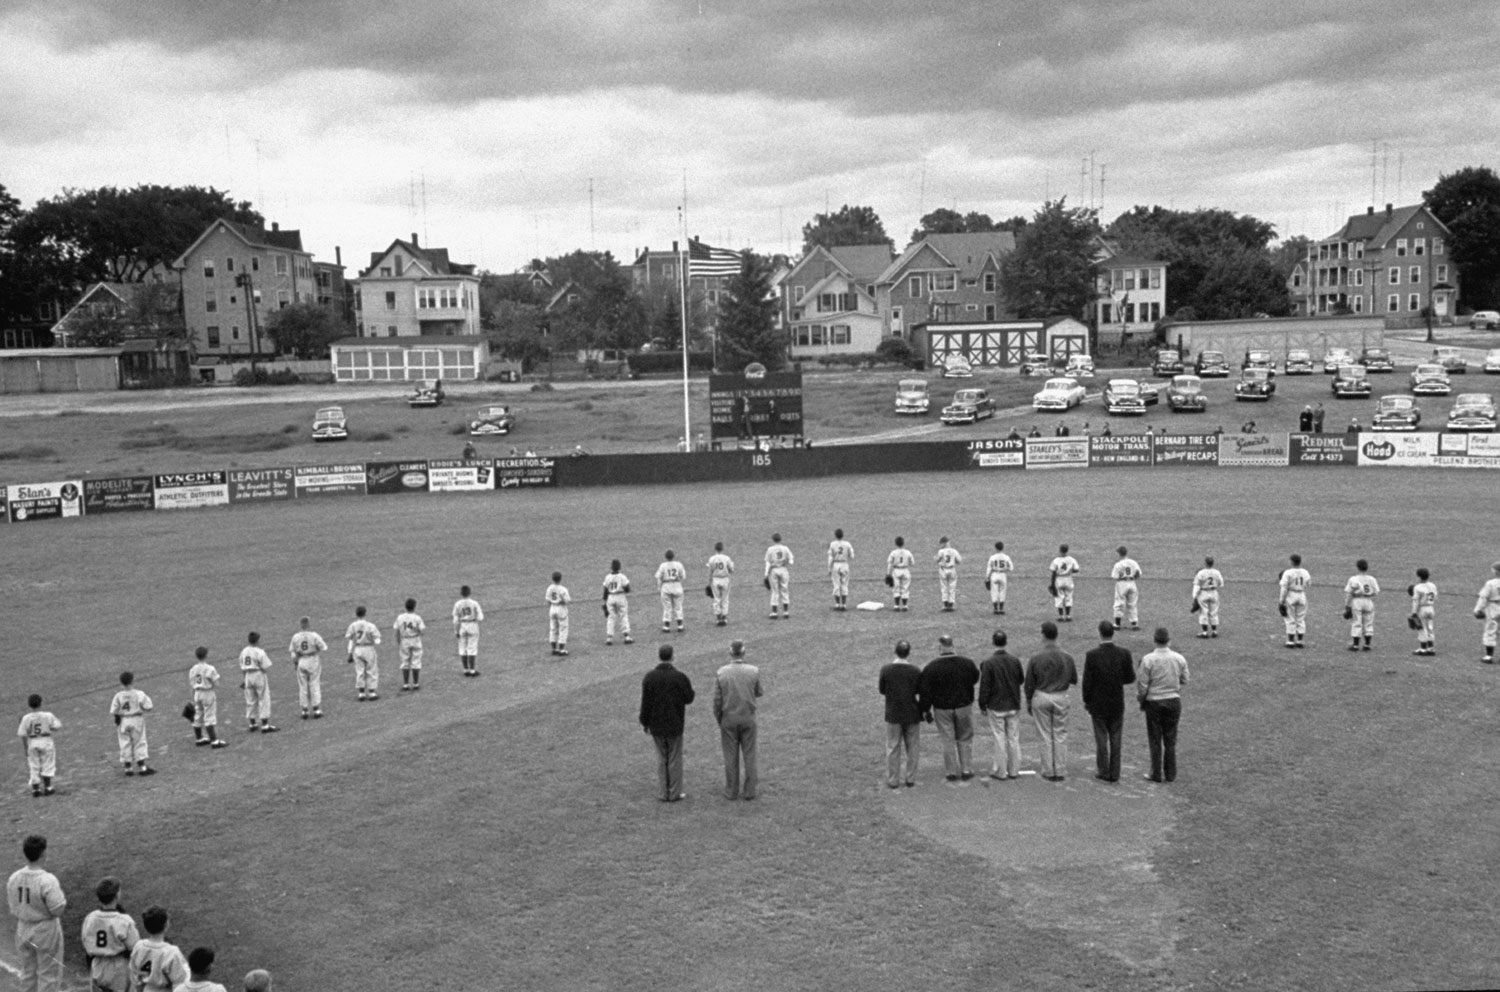 Before game the players and coaches stand at attention and face flag during national anthem. Little League field is patterned after major league stadium but in almost every detail is one third smaller.